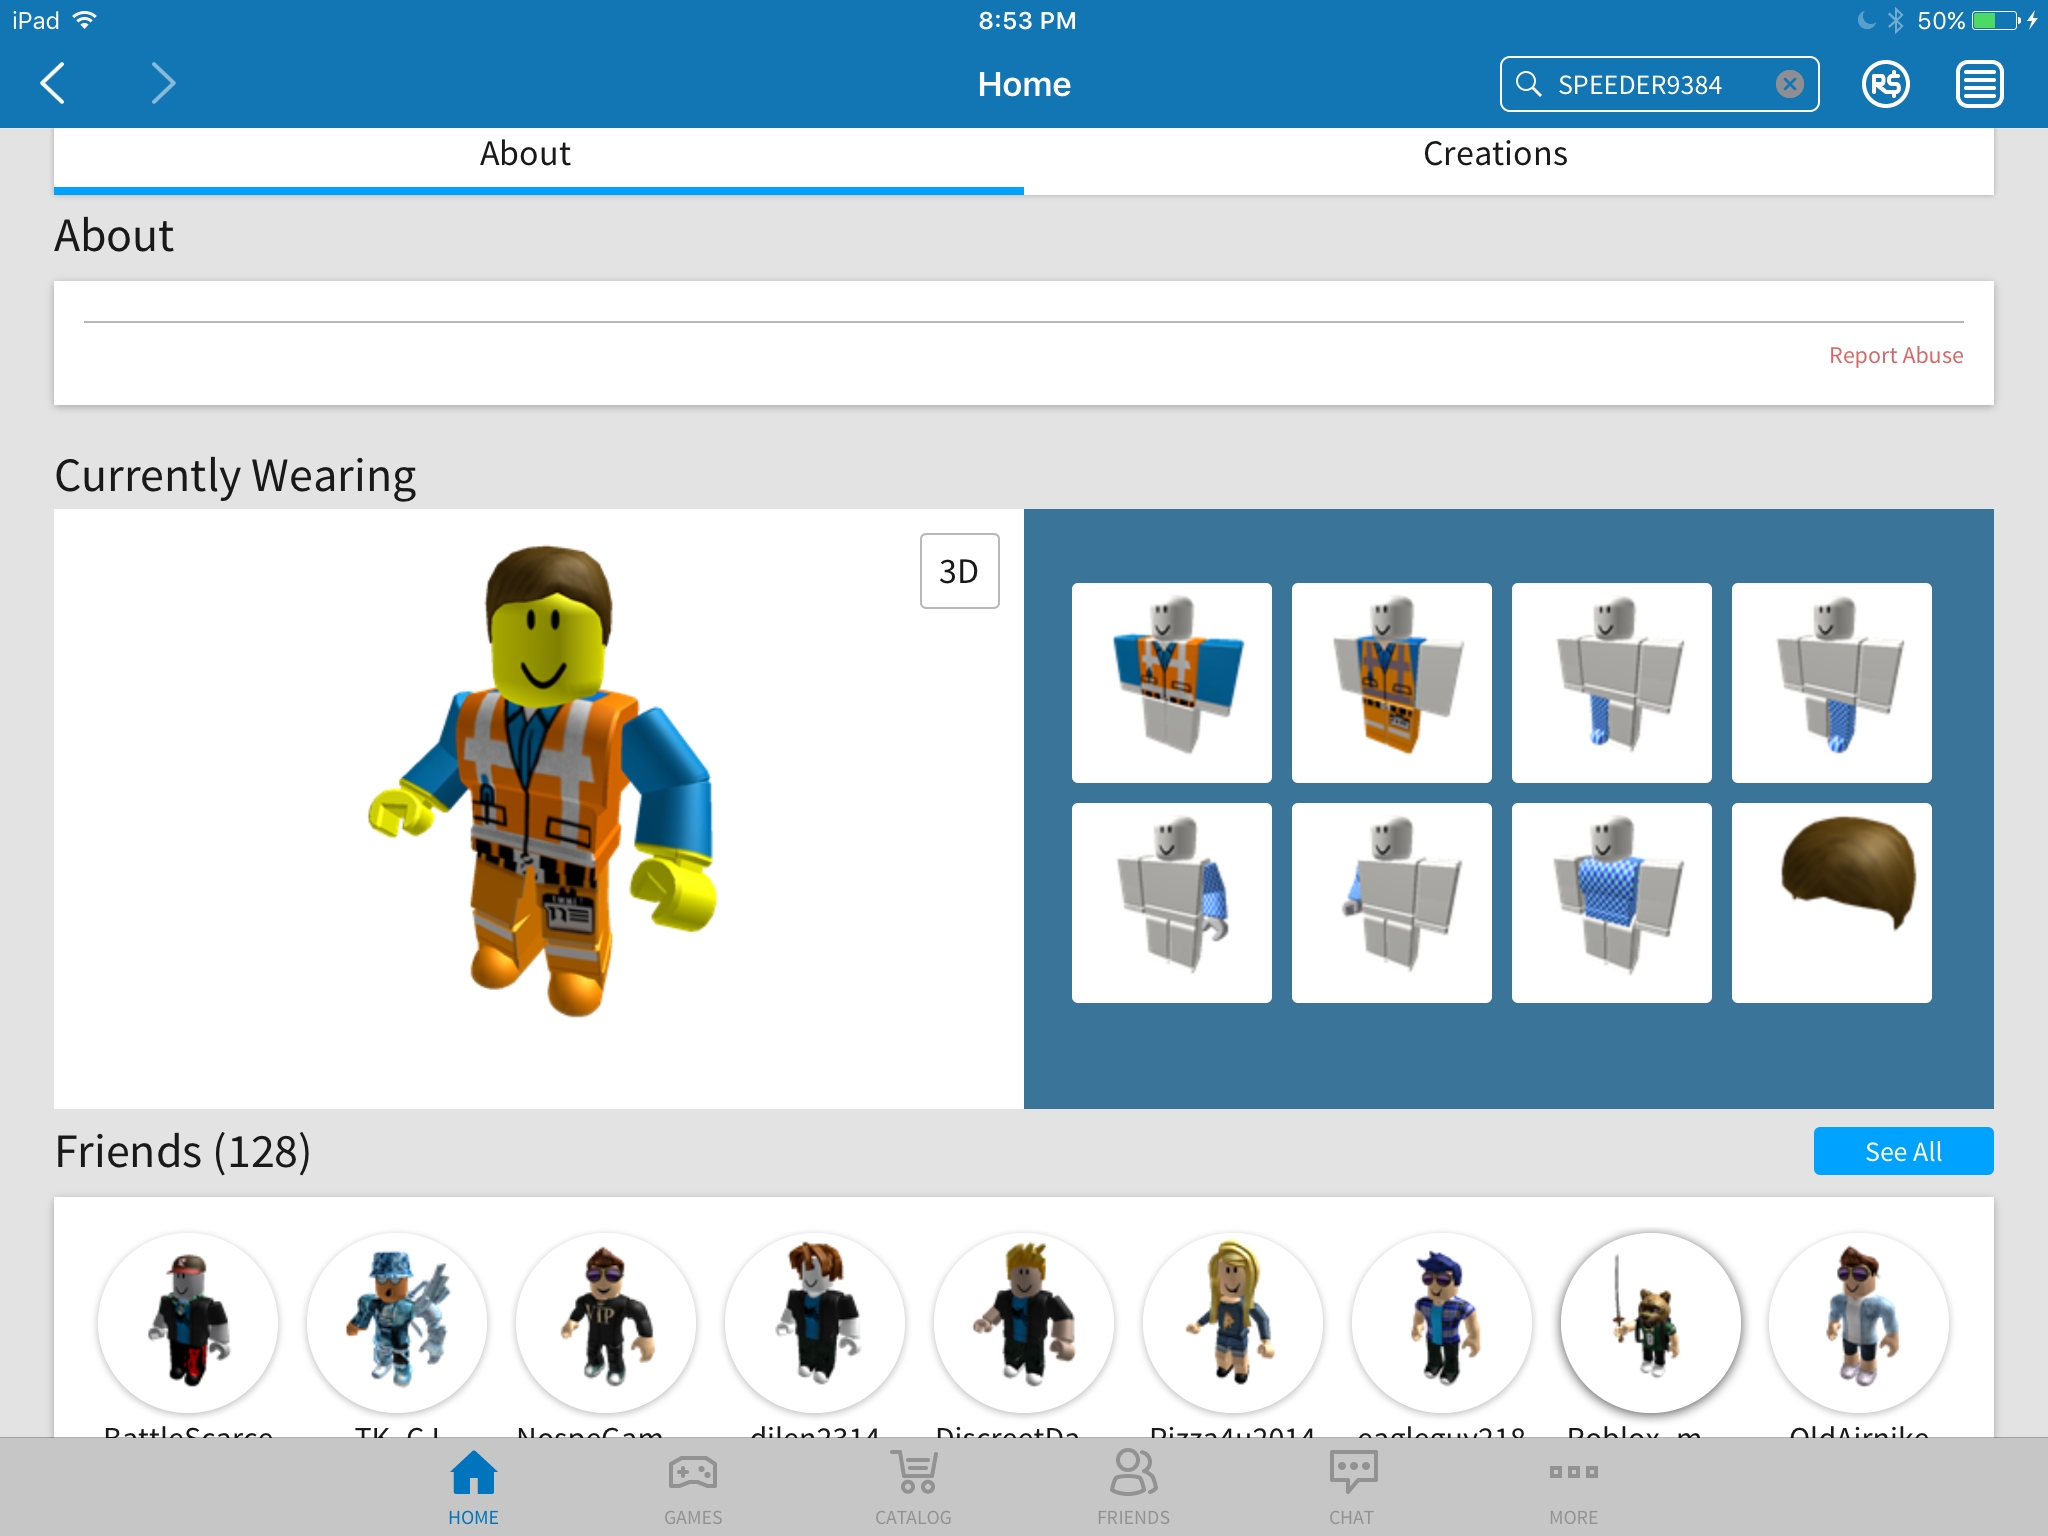 Hacked Accounts On Roblox